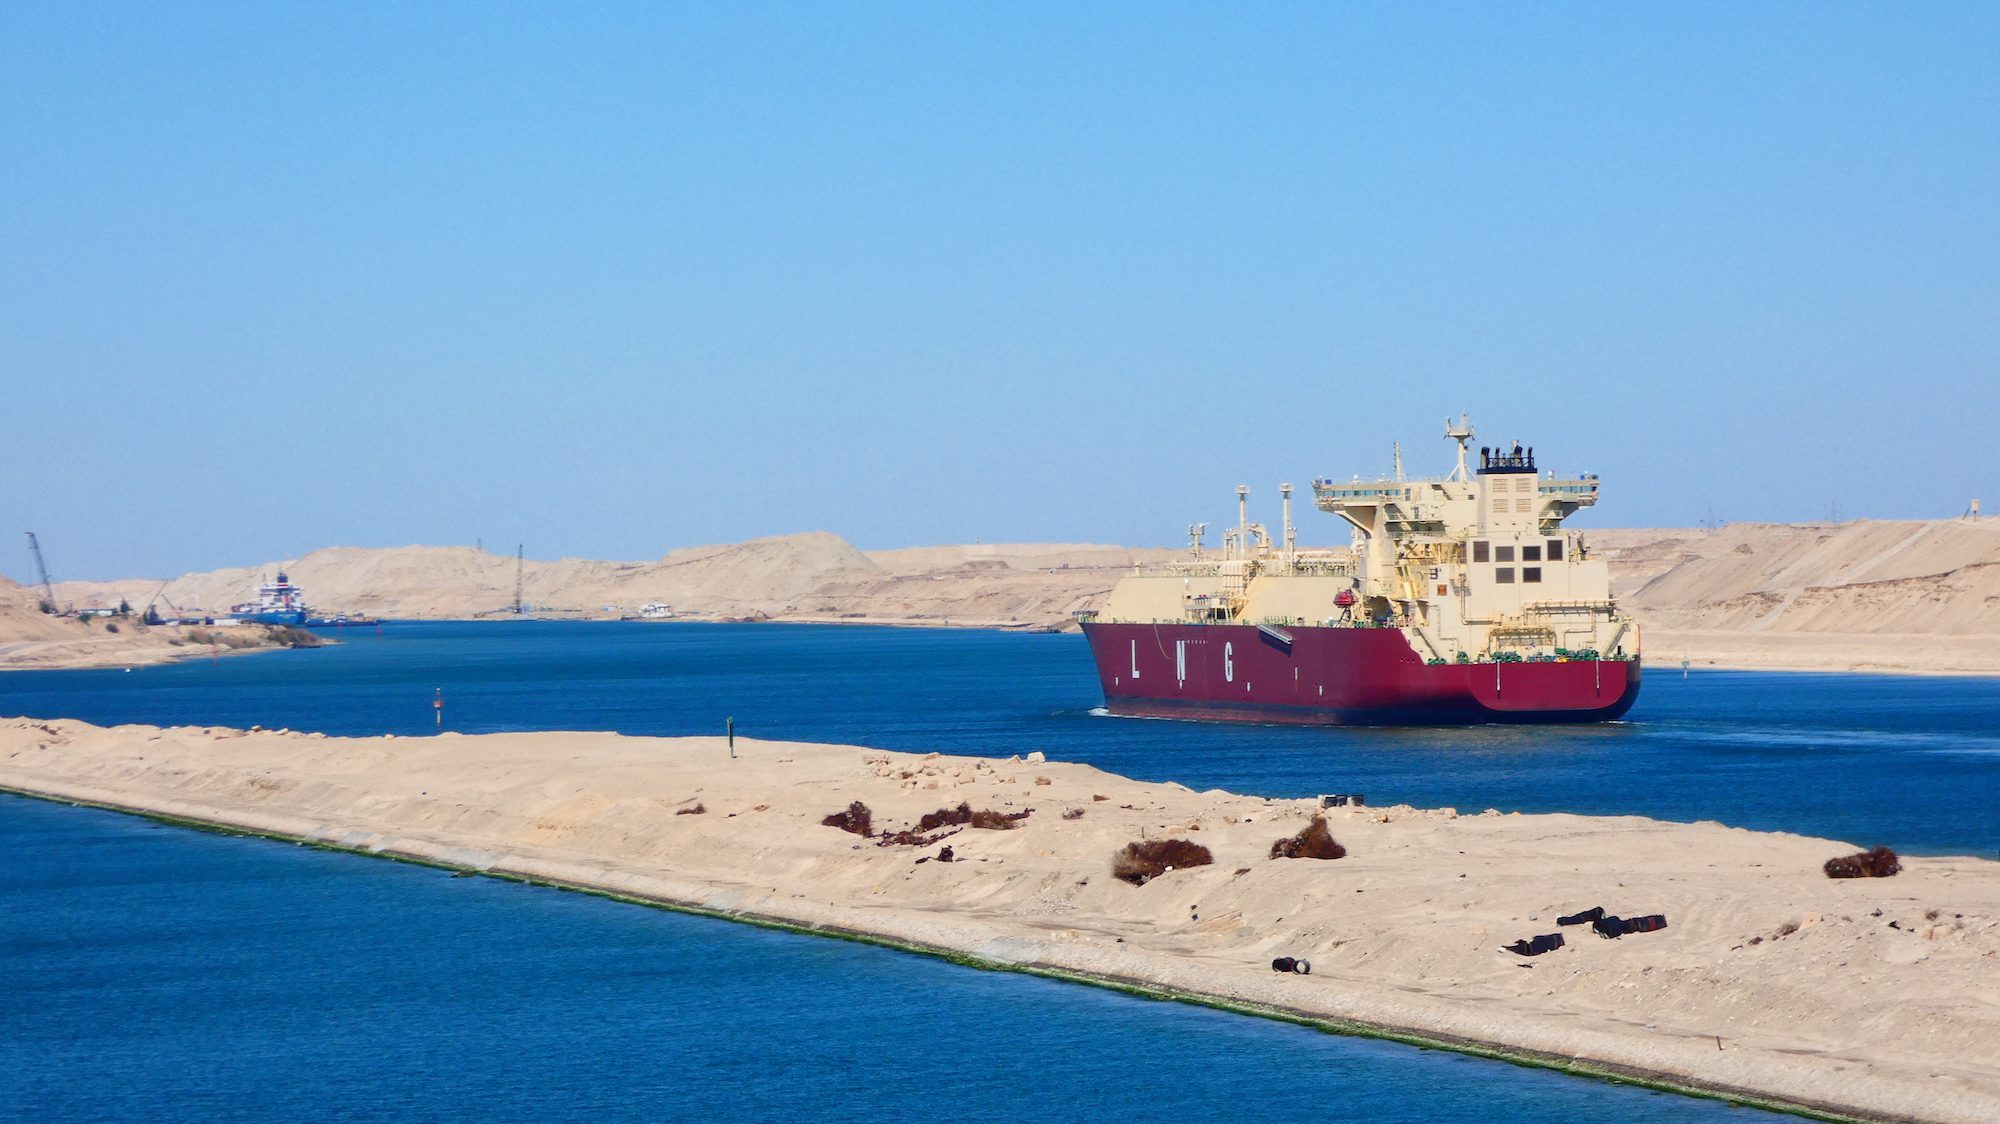 File photo of an LNG carrier in the Suez Canal